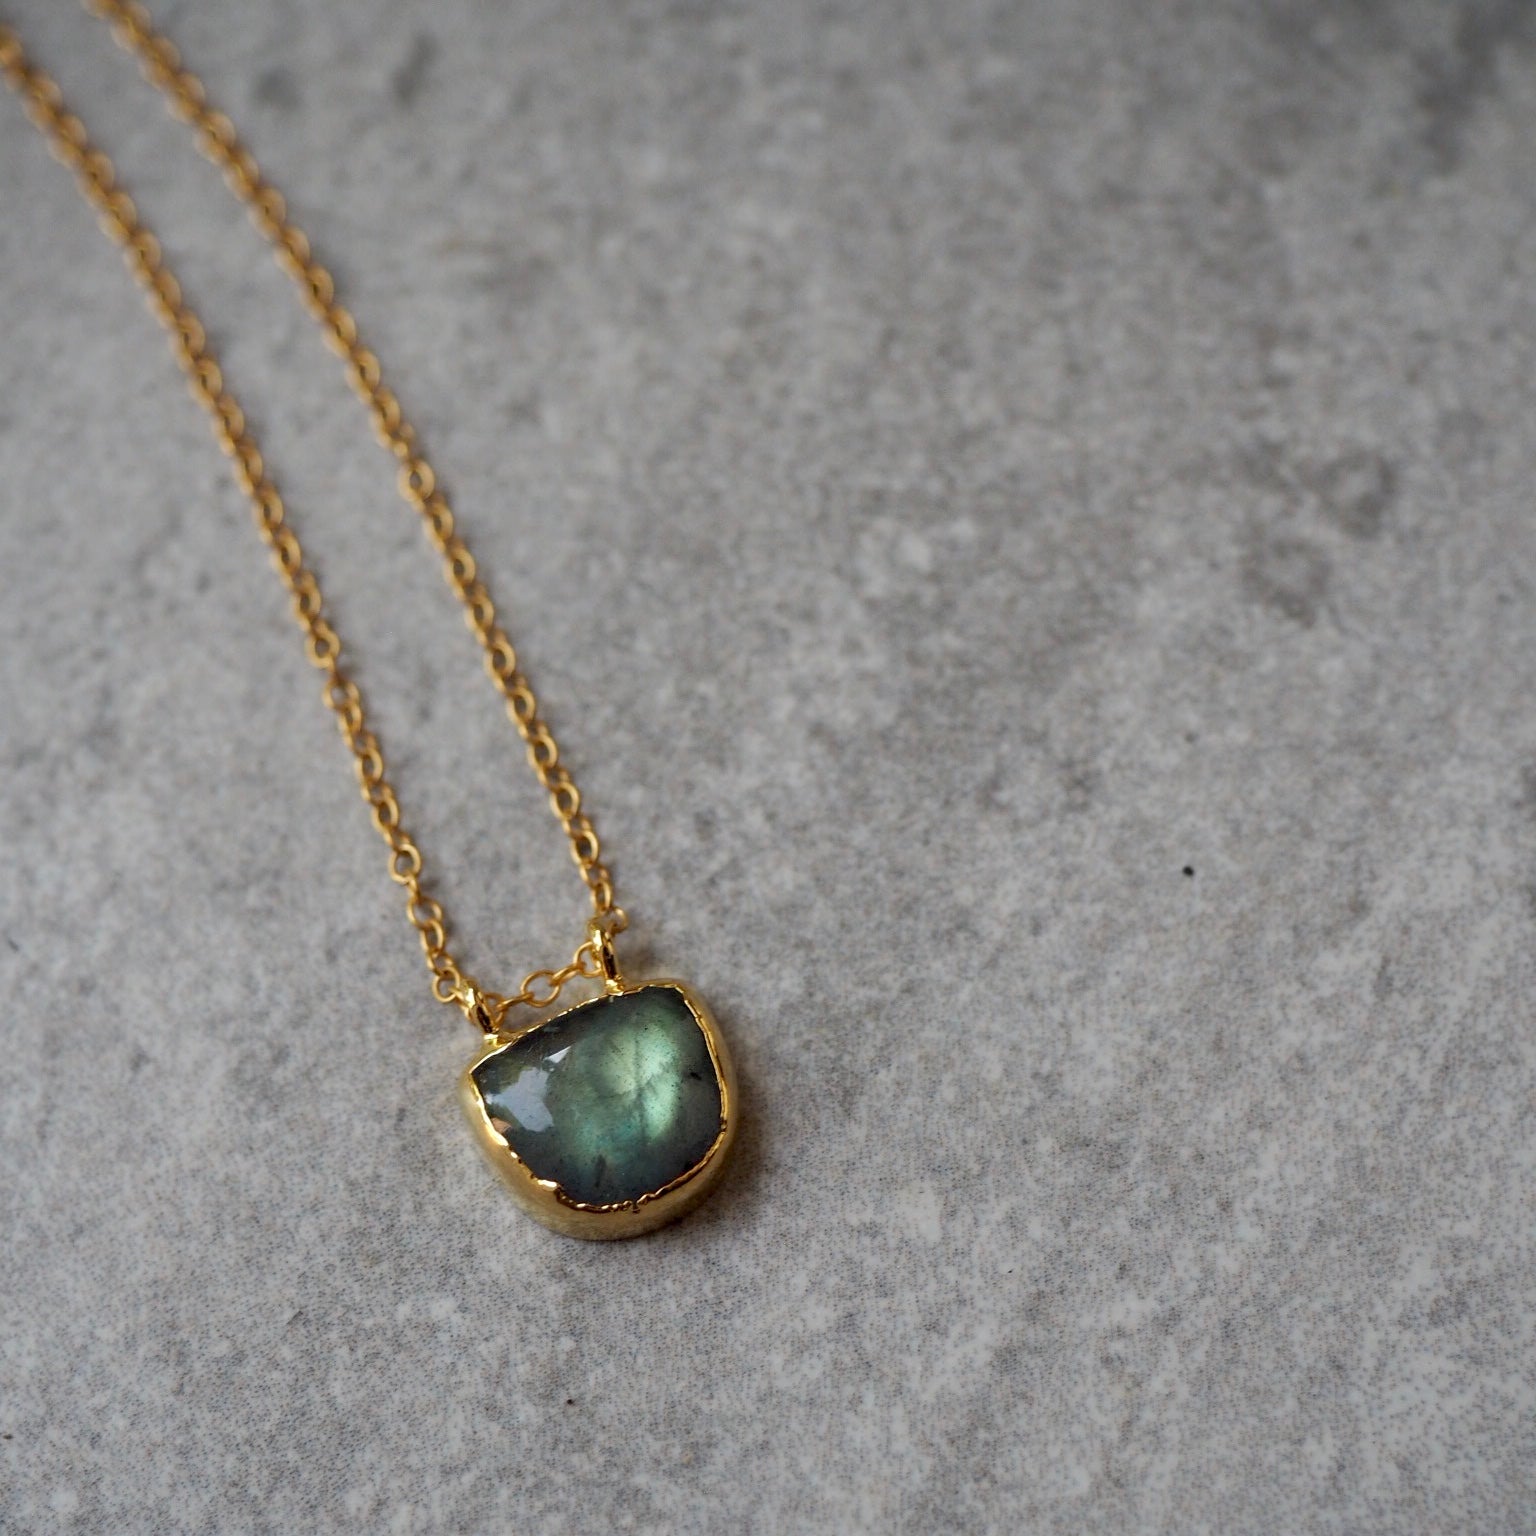 Gold filled necklace with Labradorite pendant by Wallis Designs